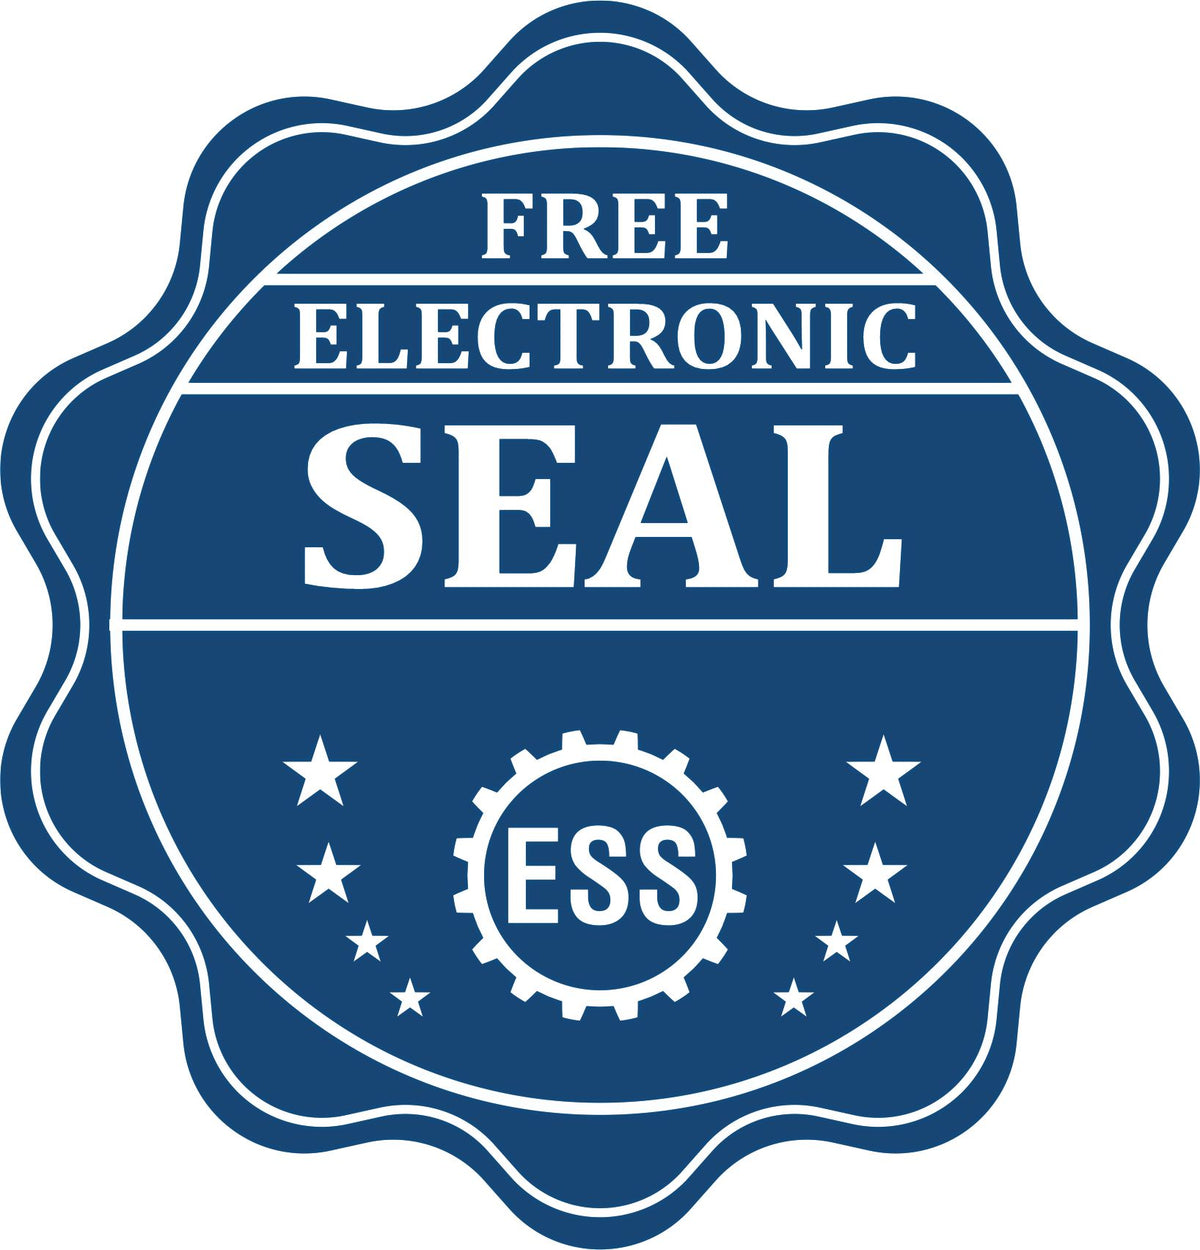 A badge showing a free electronic seal for the Gift Minnesota Landscape Architect Seal with stars and the ESS gear on the emblem.